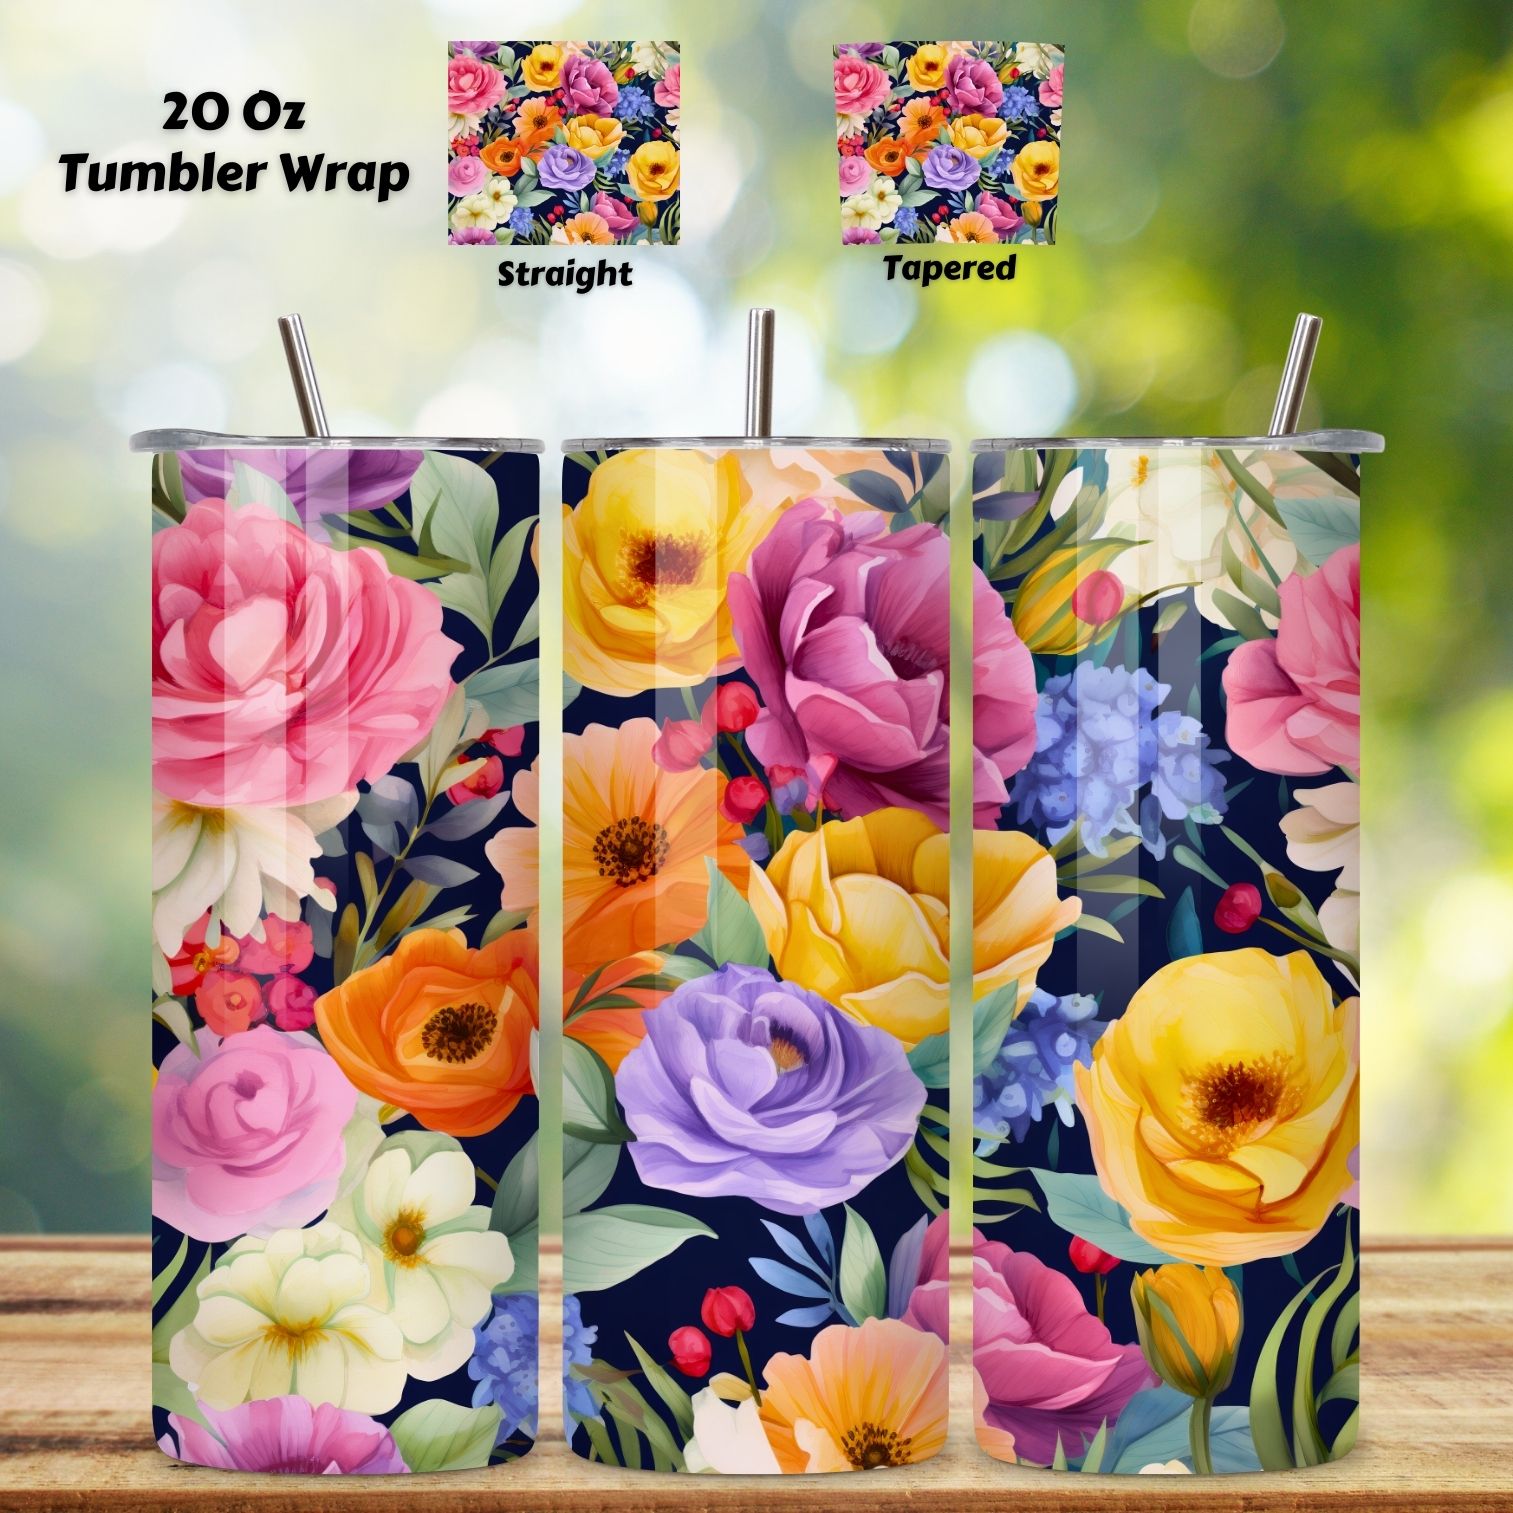 Tuscany Superb Watercolor Roses Wrapping Paper Roll – Studio Ten Design